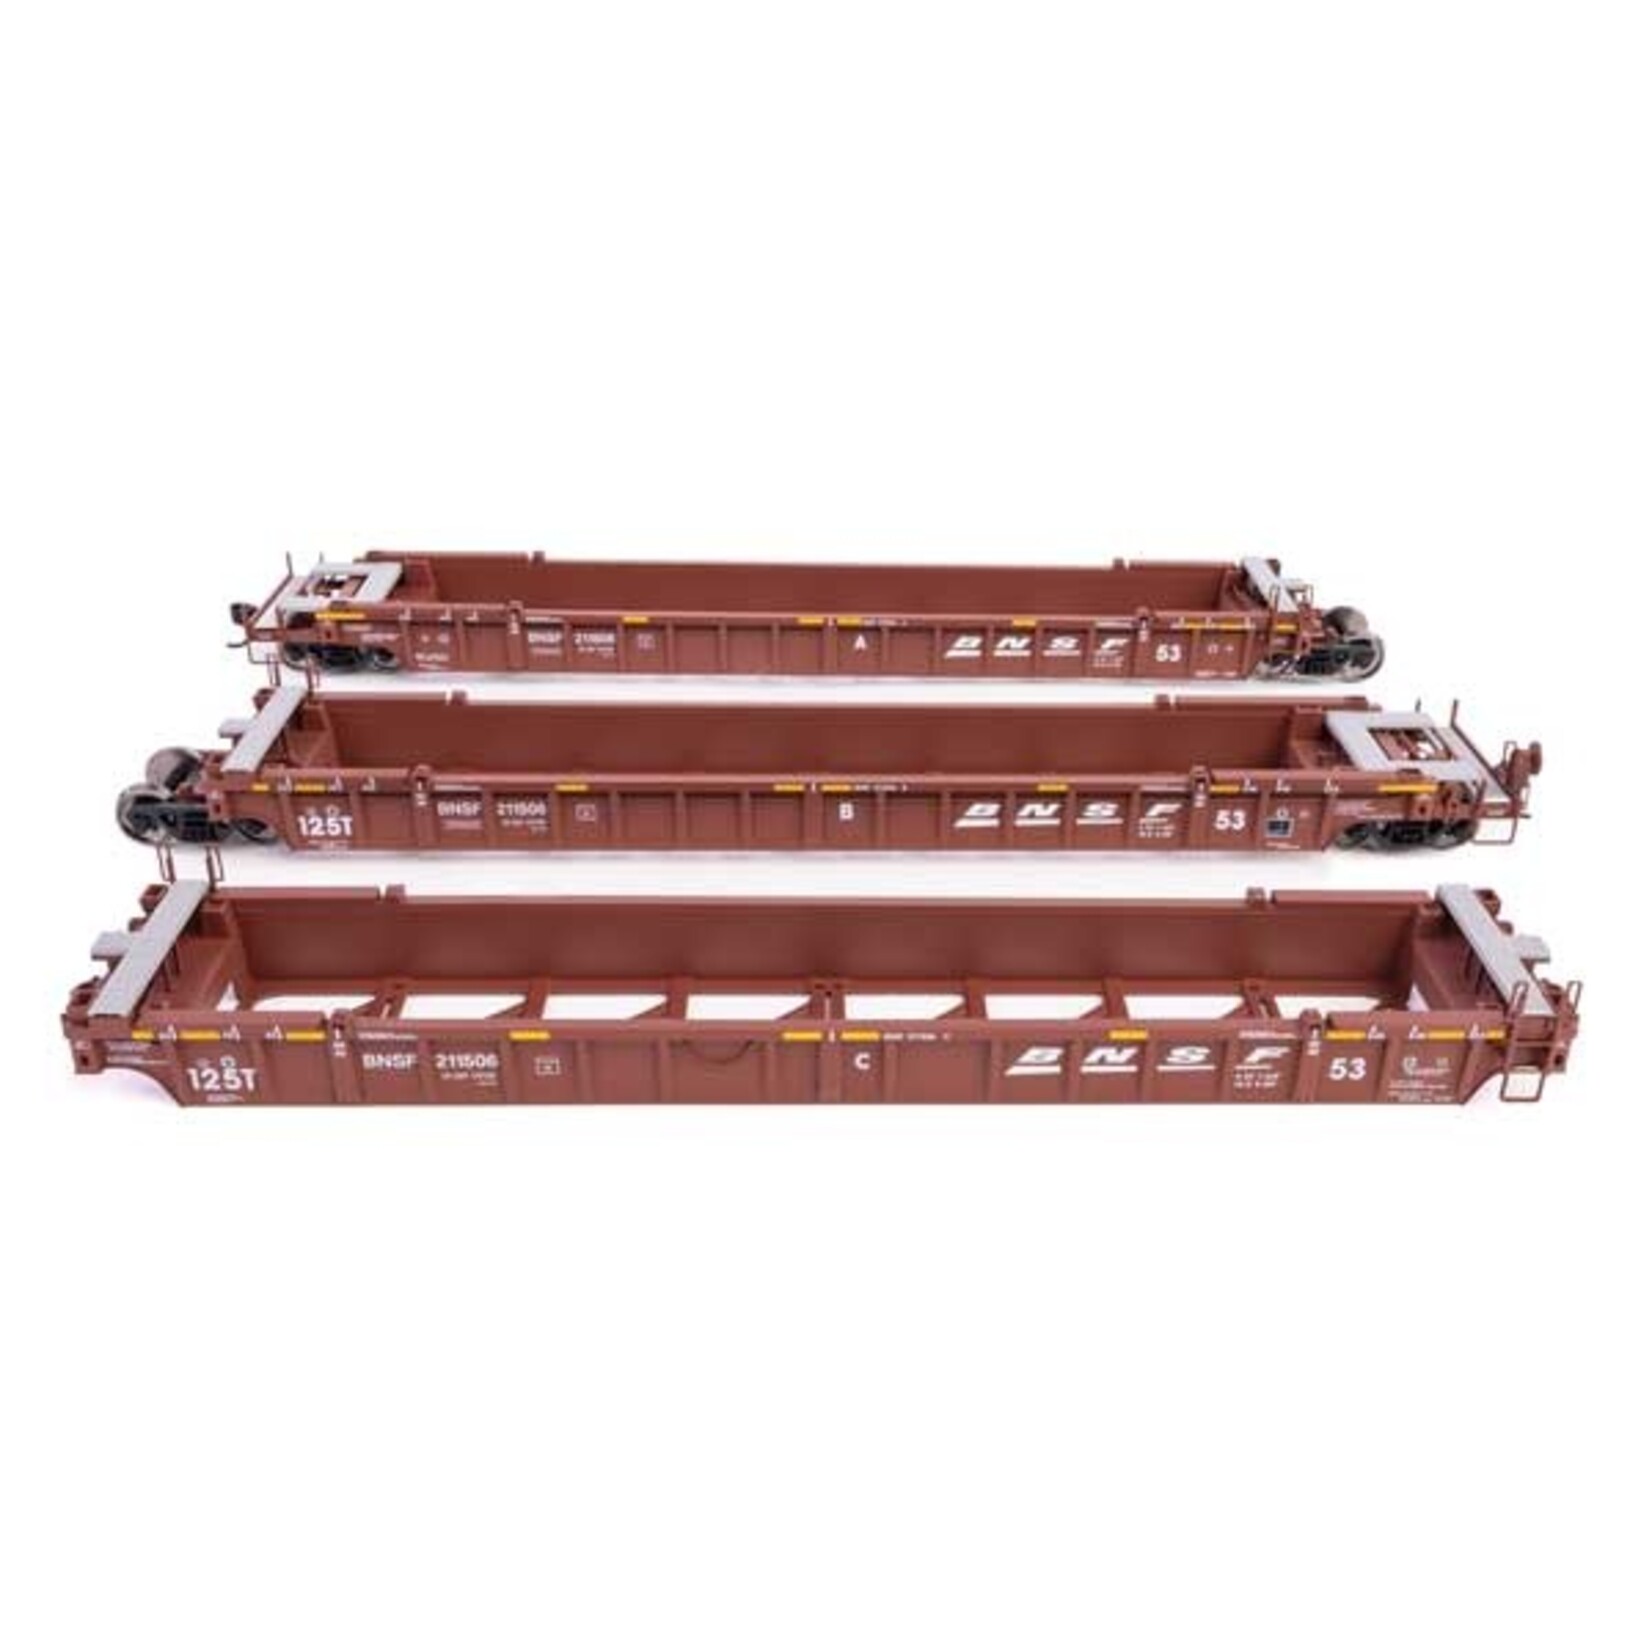 Walthers NSC Articulated 3-Unit 53' Well Car - BNSF Railway #211506 (brown, white)